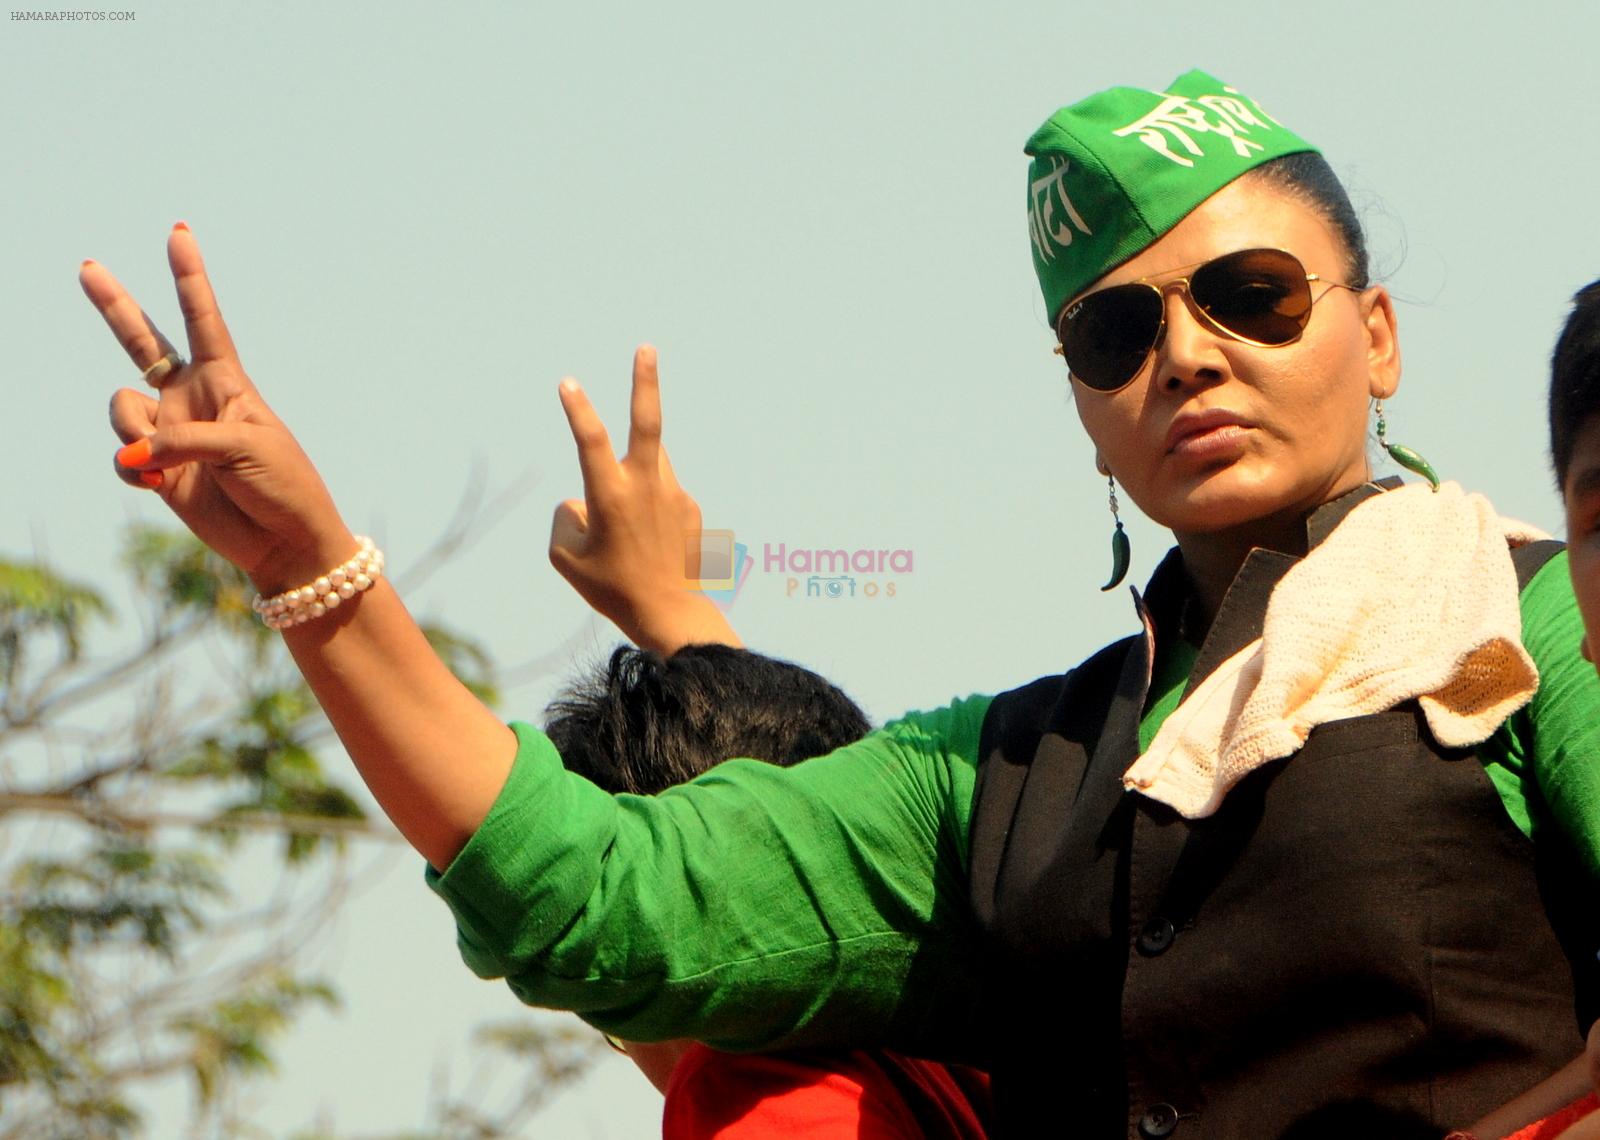 Rakhi Sawant (Candidate of Rashtriya Aam Party from North West Mumbai) during her finale rally